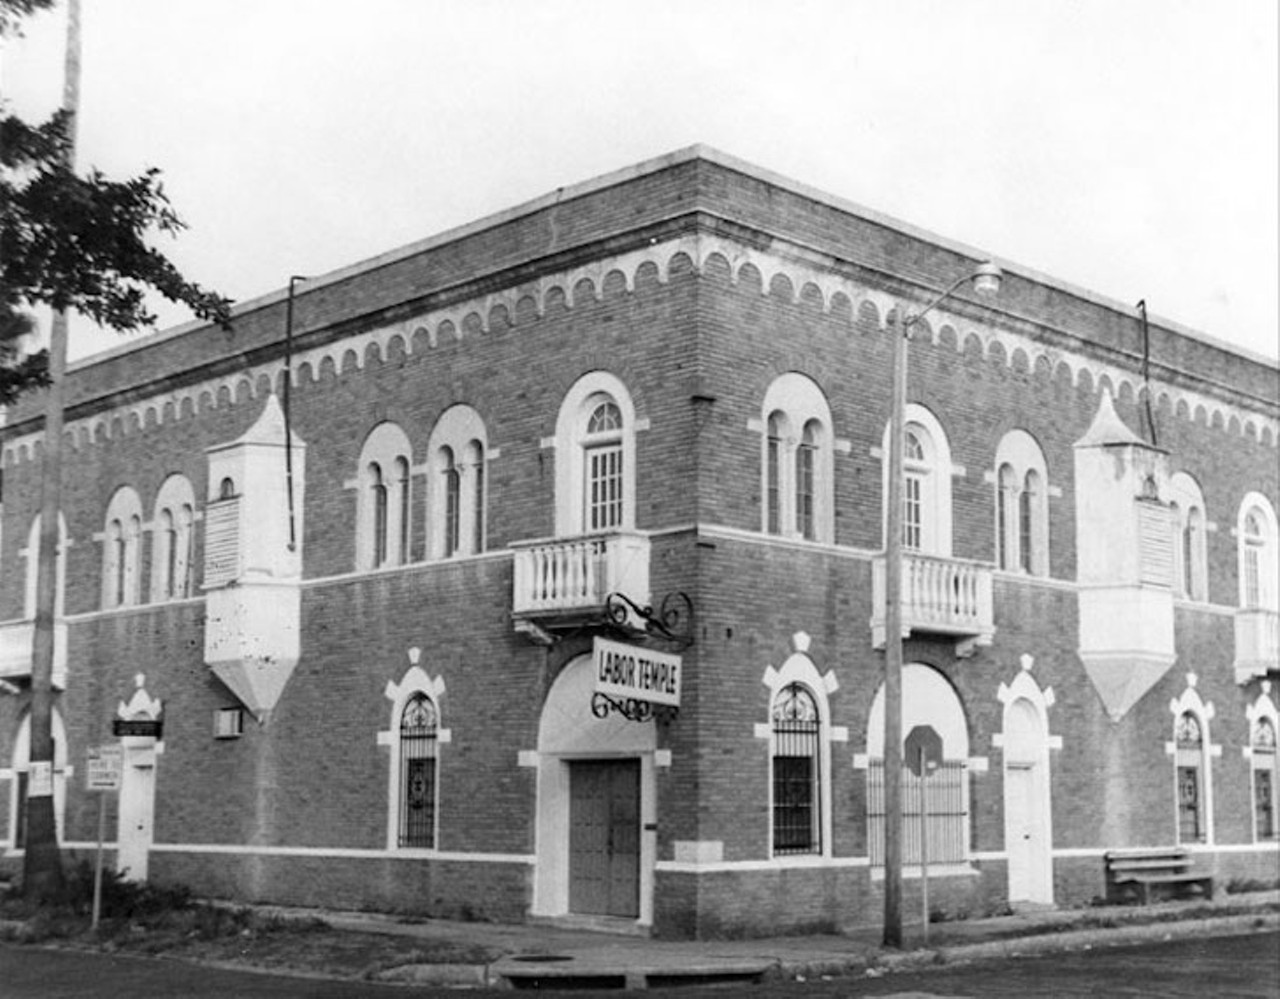 The former &#147;Labor Temple&#148; in Ybor, where unions used to meet, is now a goth nightclub  
Yeah, that Goth nightclub, The Castle, used to be a pretty important structure in Ybor City lore. Before Bauhaus-filled nights, the Labor Temple was actually a meeting place for the area&#146;s local cigar and waiter unions. 
Photo via USF